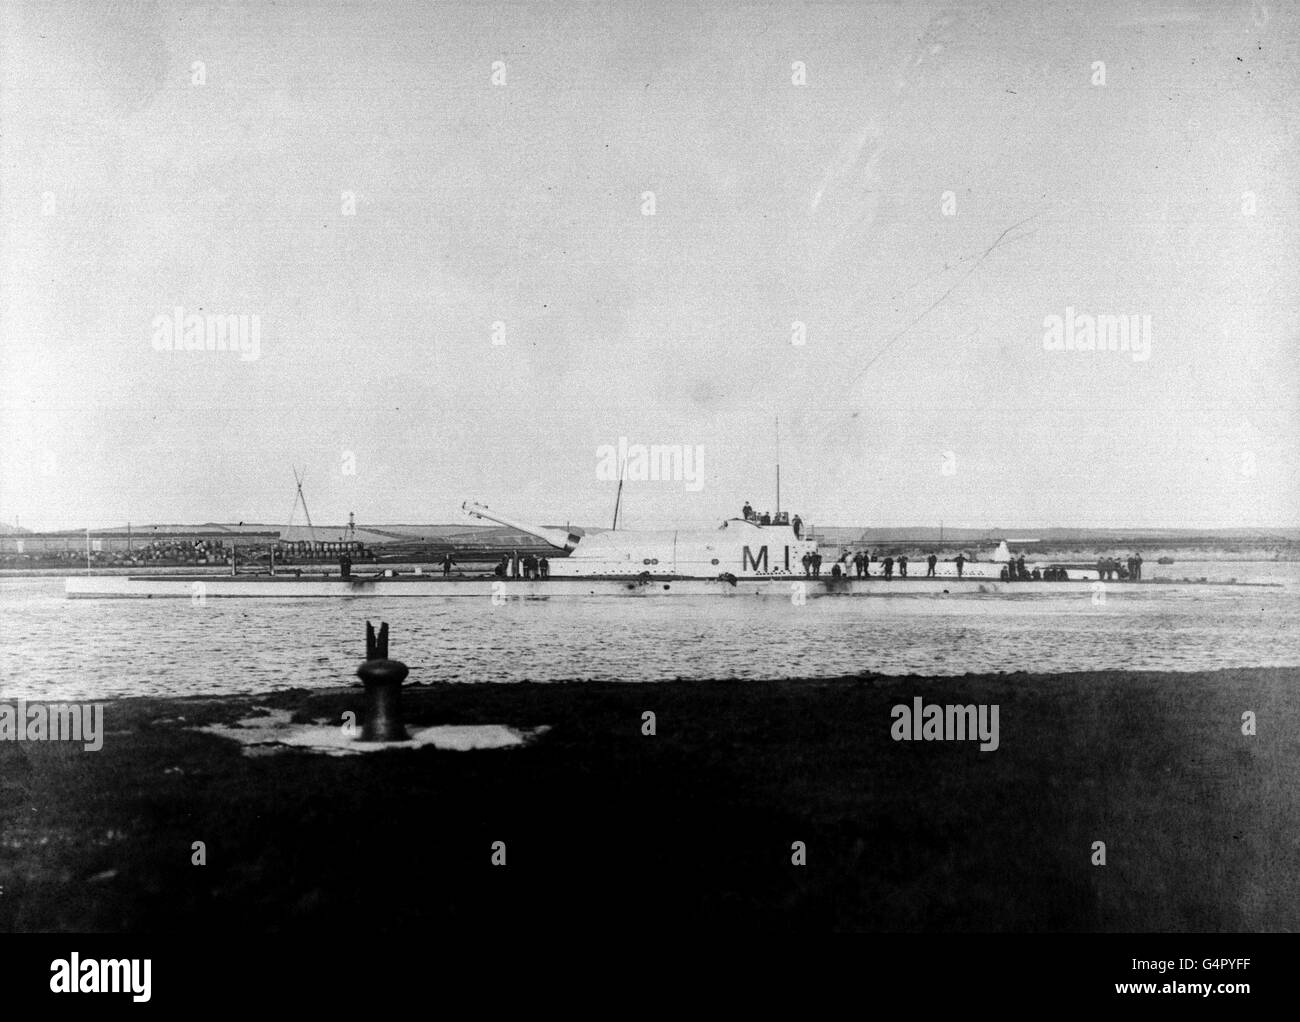 PA Photo 1919: A library file picture of the First World War Royal Navy Submarine M1, recently (1999) discovered on the seabed off Portsmouth. The submarine is thought to have sunk after being struck accidentally by a ship. There were no survivors. Stock Photo